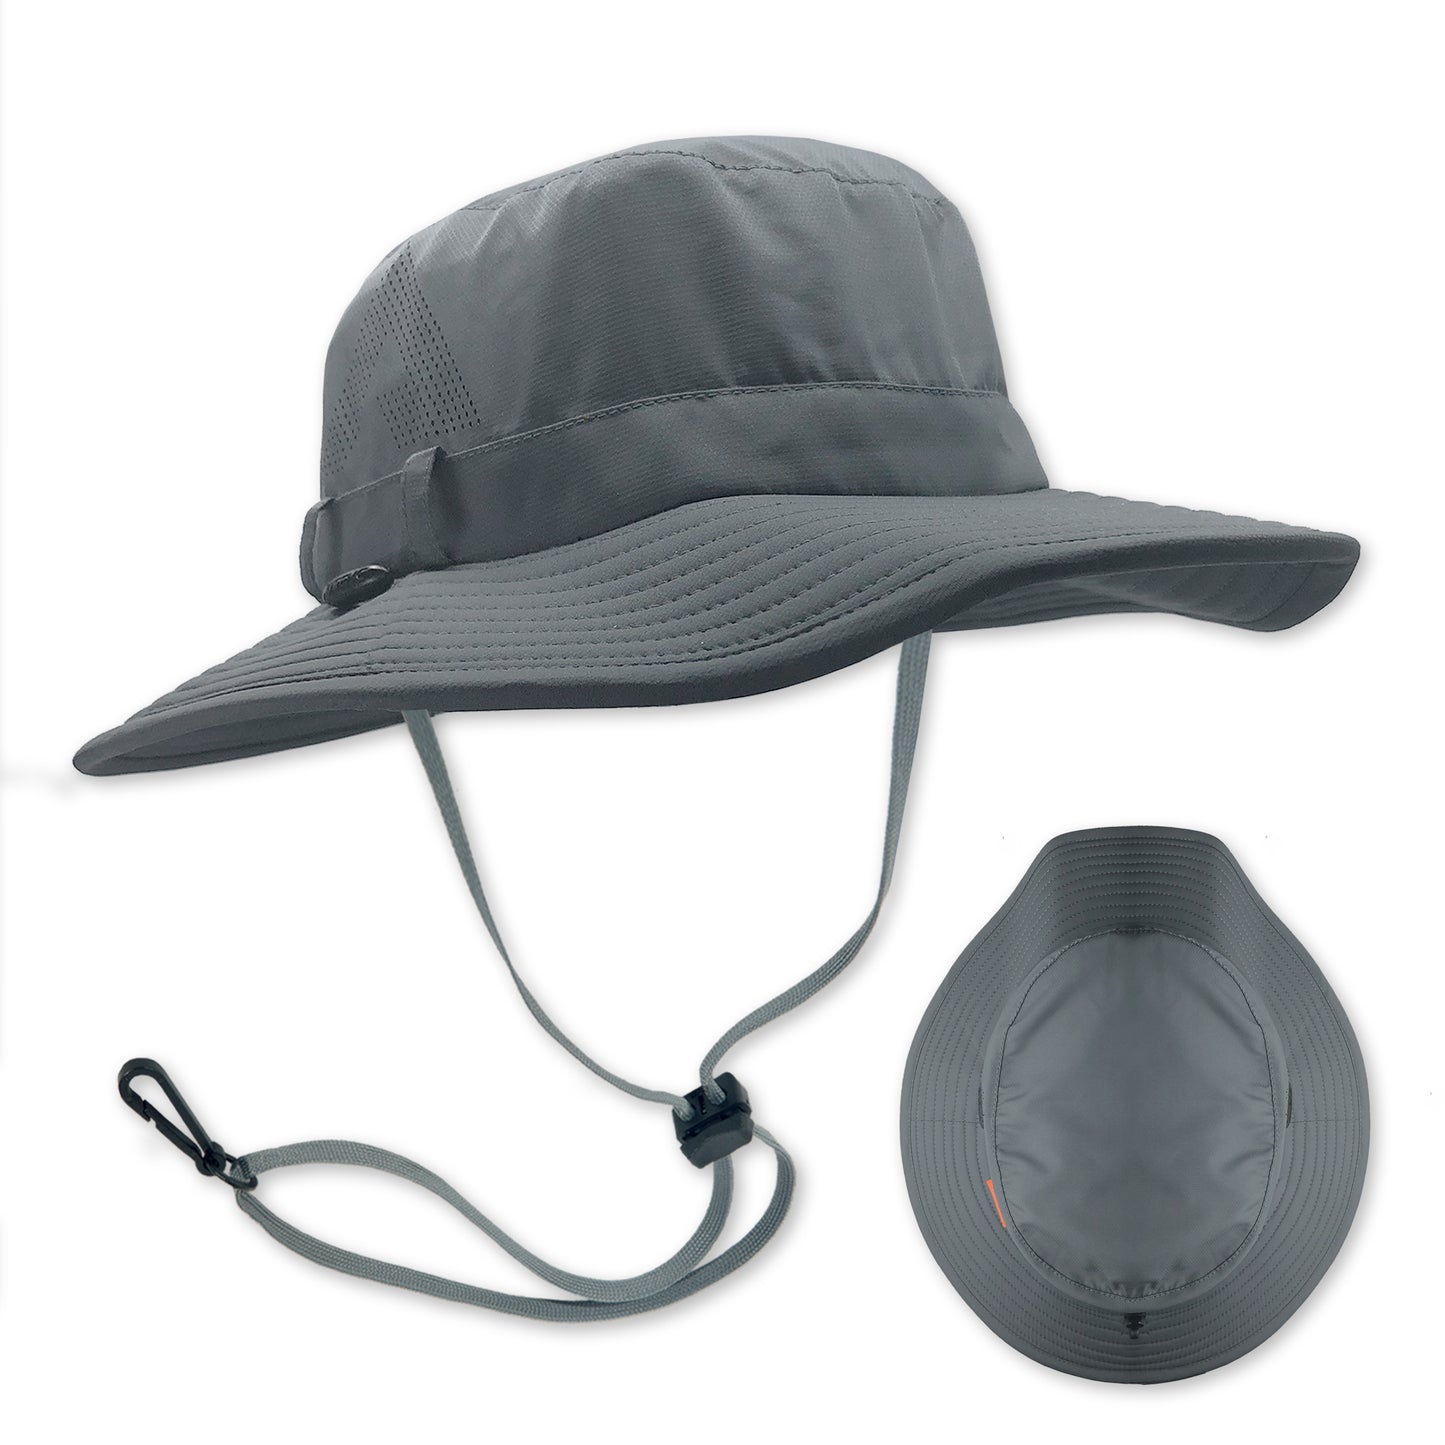 The Condor sun hat in the color storm grey is a more traditional looking style features a deeper crown for air flow and a wider downward angled brim for more UV protection. A full vapor barrier liner keeps the fabric off of your scalp and allows air to flow through the laser cut venting holes and breathable fabric.. The new Condor does NOT have a stash pocket. This was done to make the hat lighter.